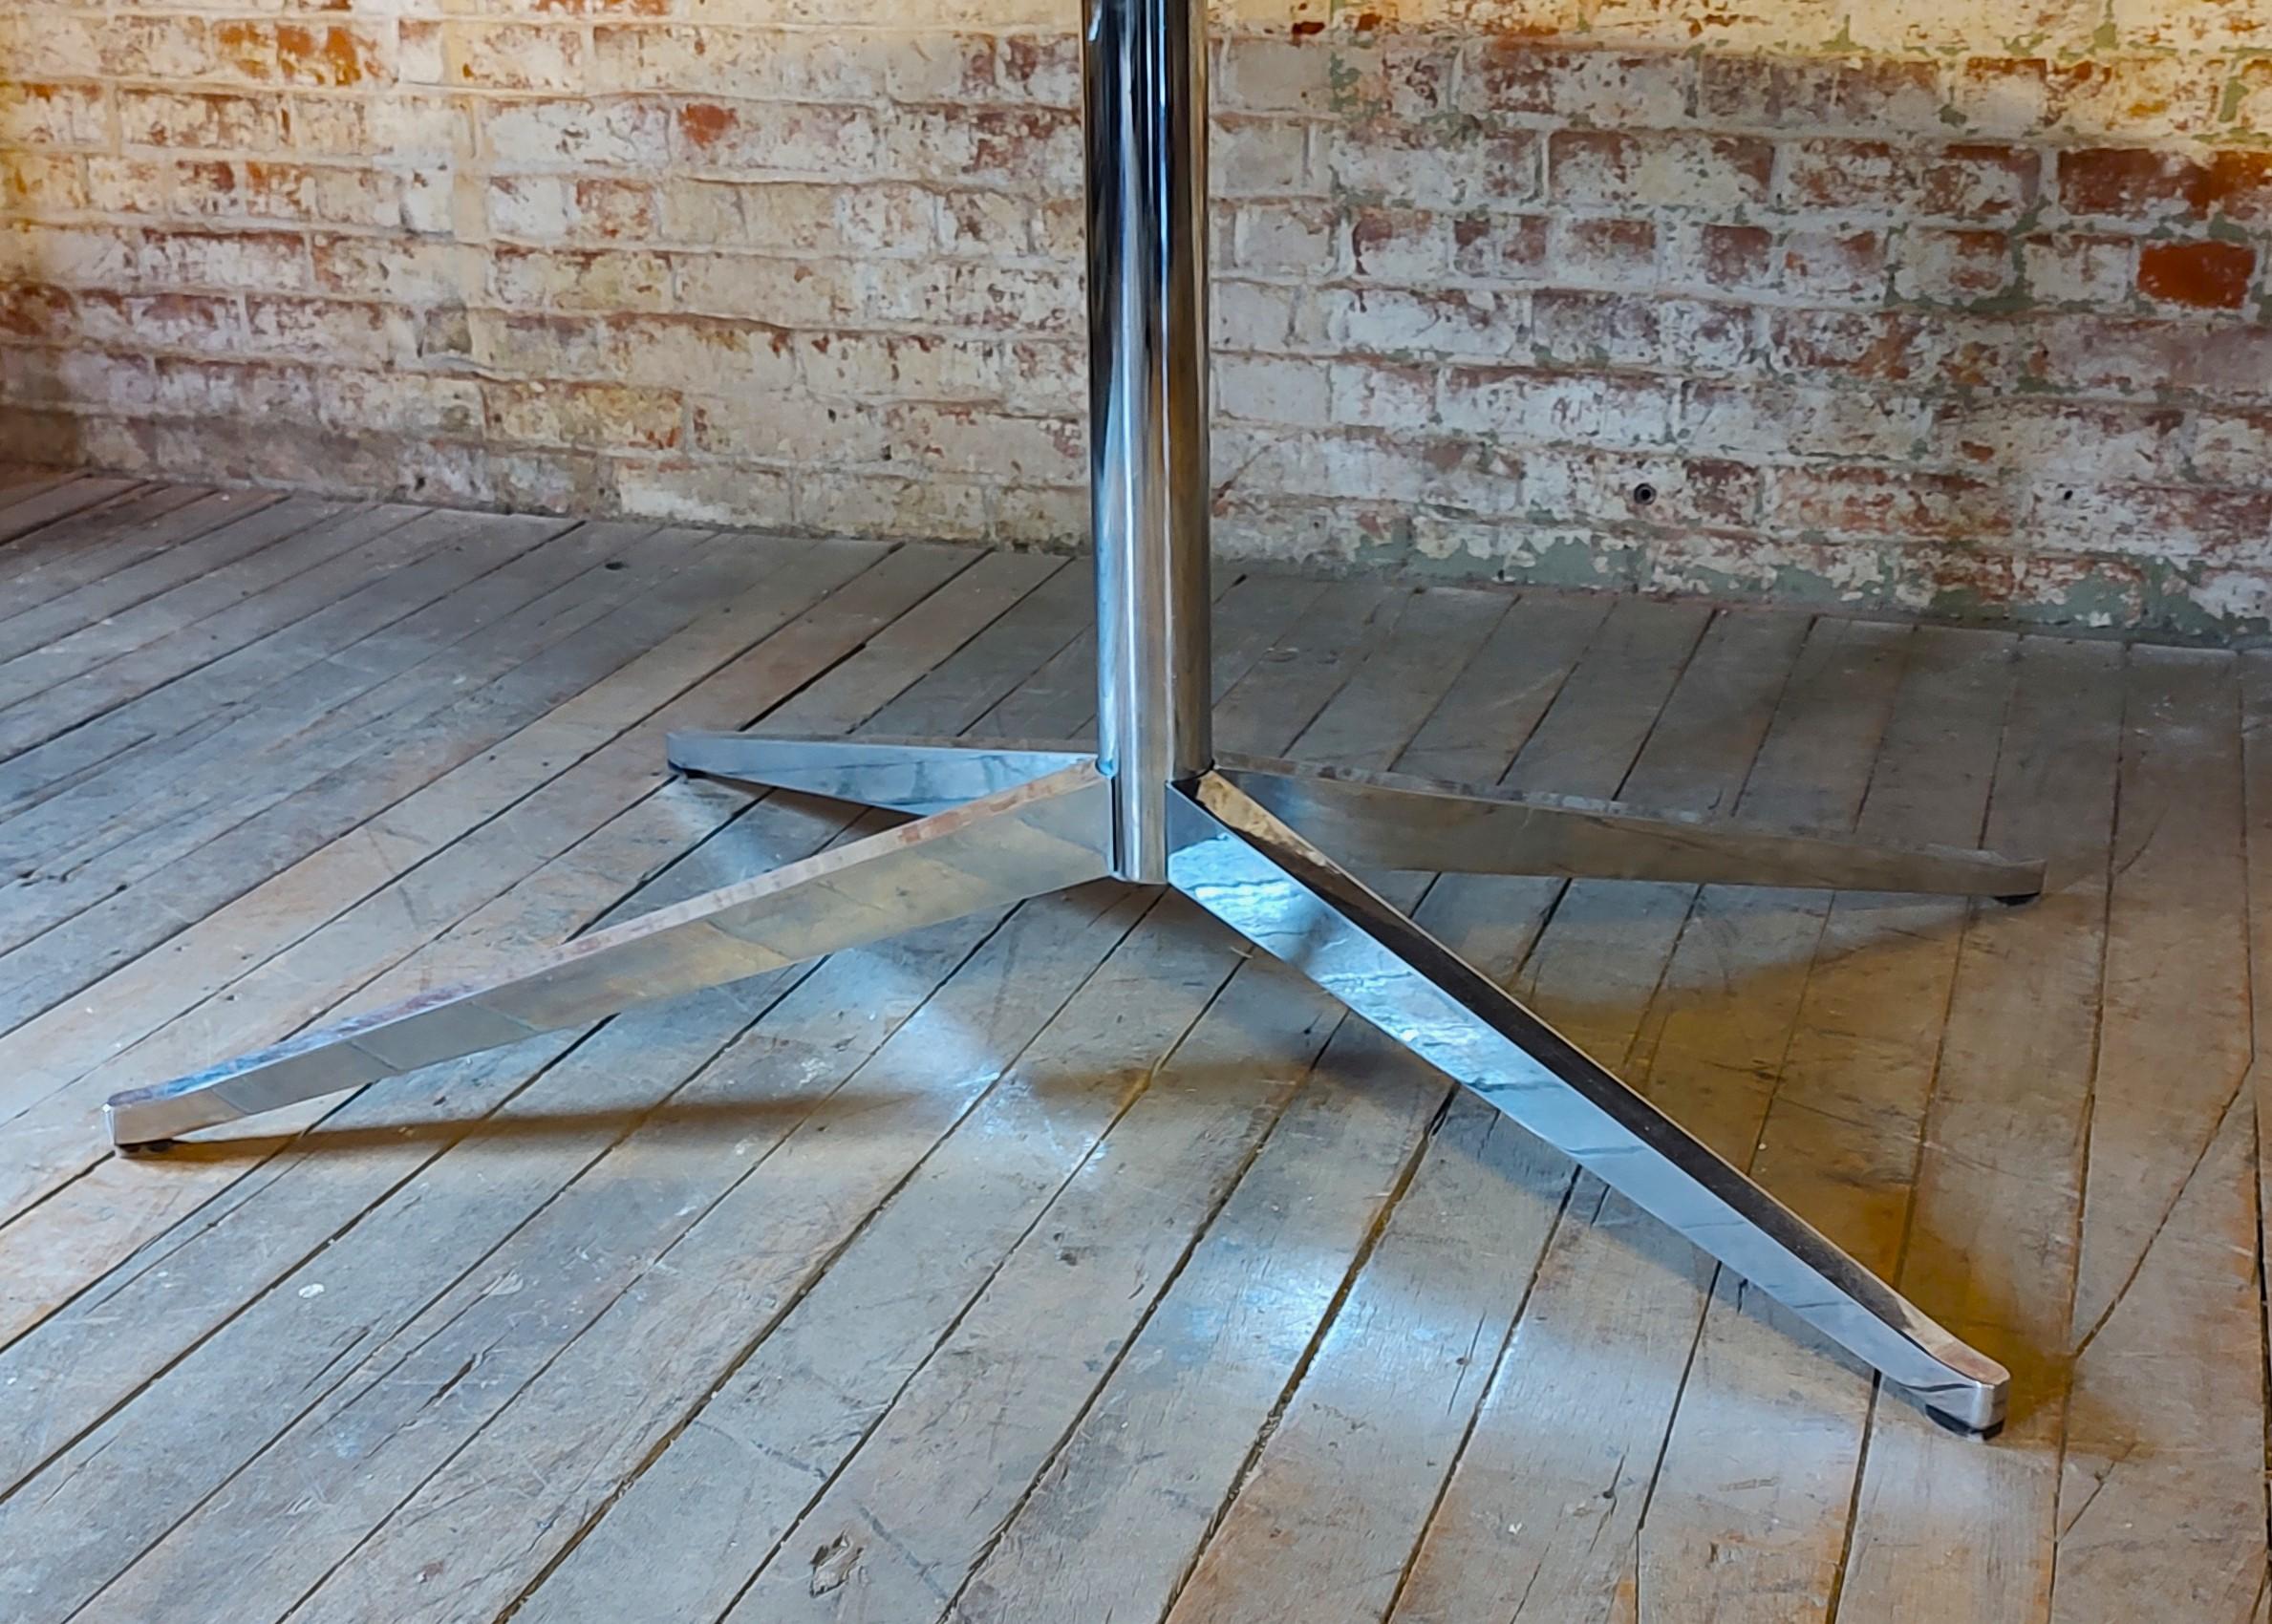 Knoll Walnut & Stainless Steel Conference / Dining Table

*The top has been refinished please review photographs thoroughly*

Overall Dimensions: 48